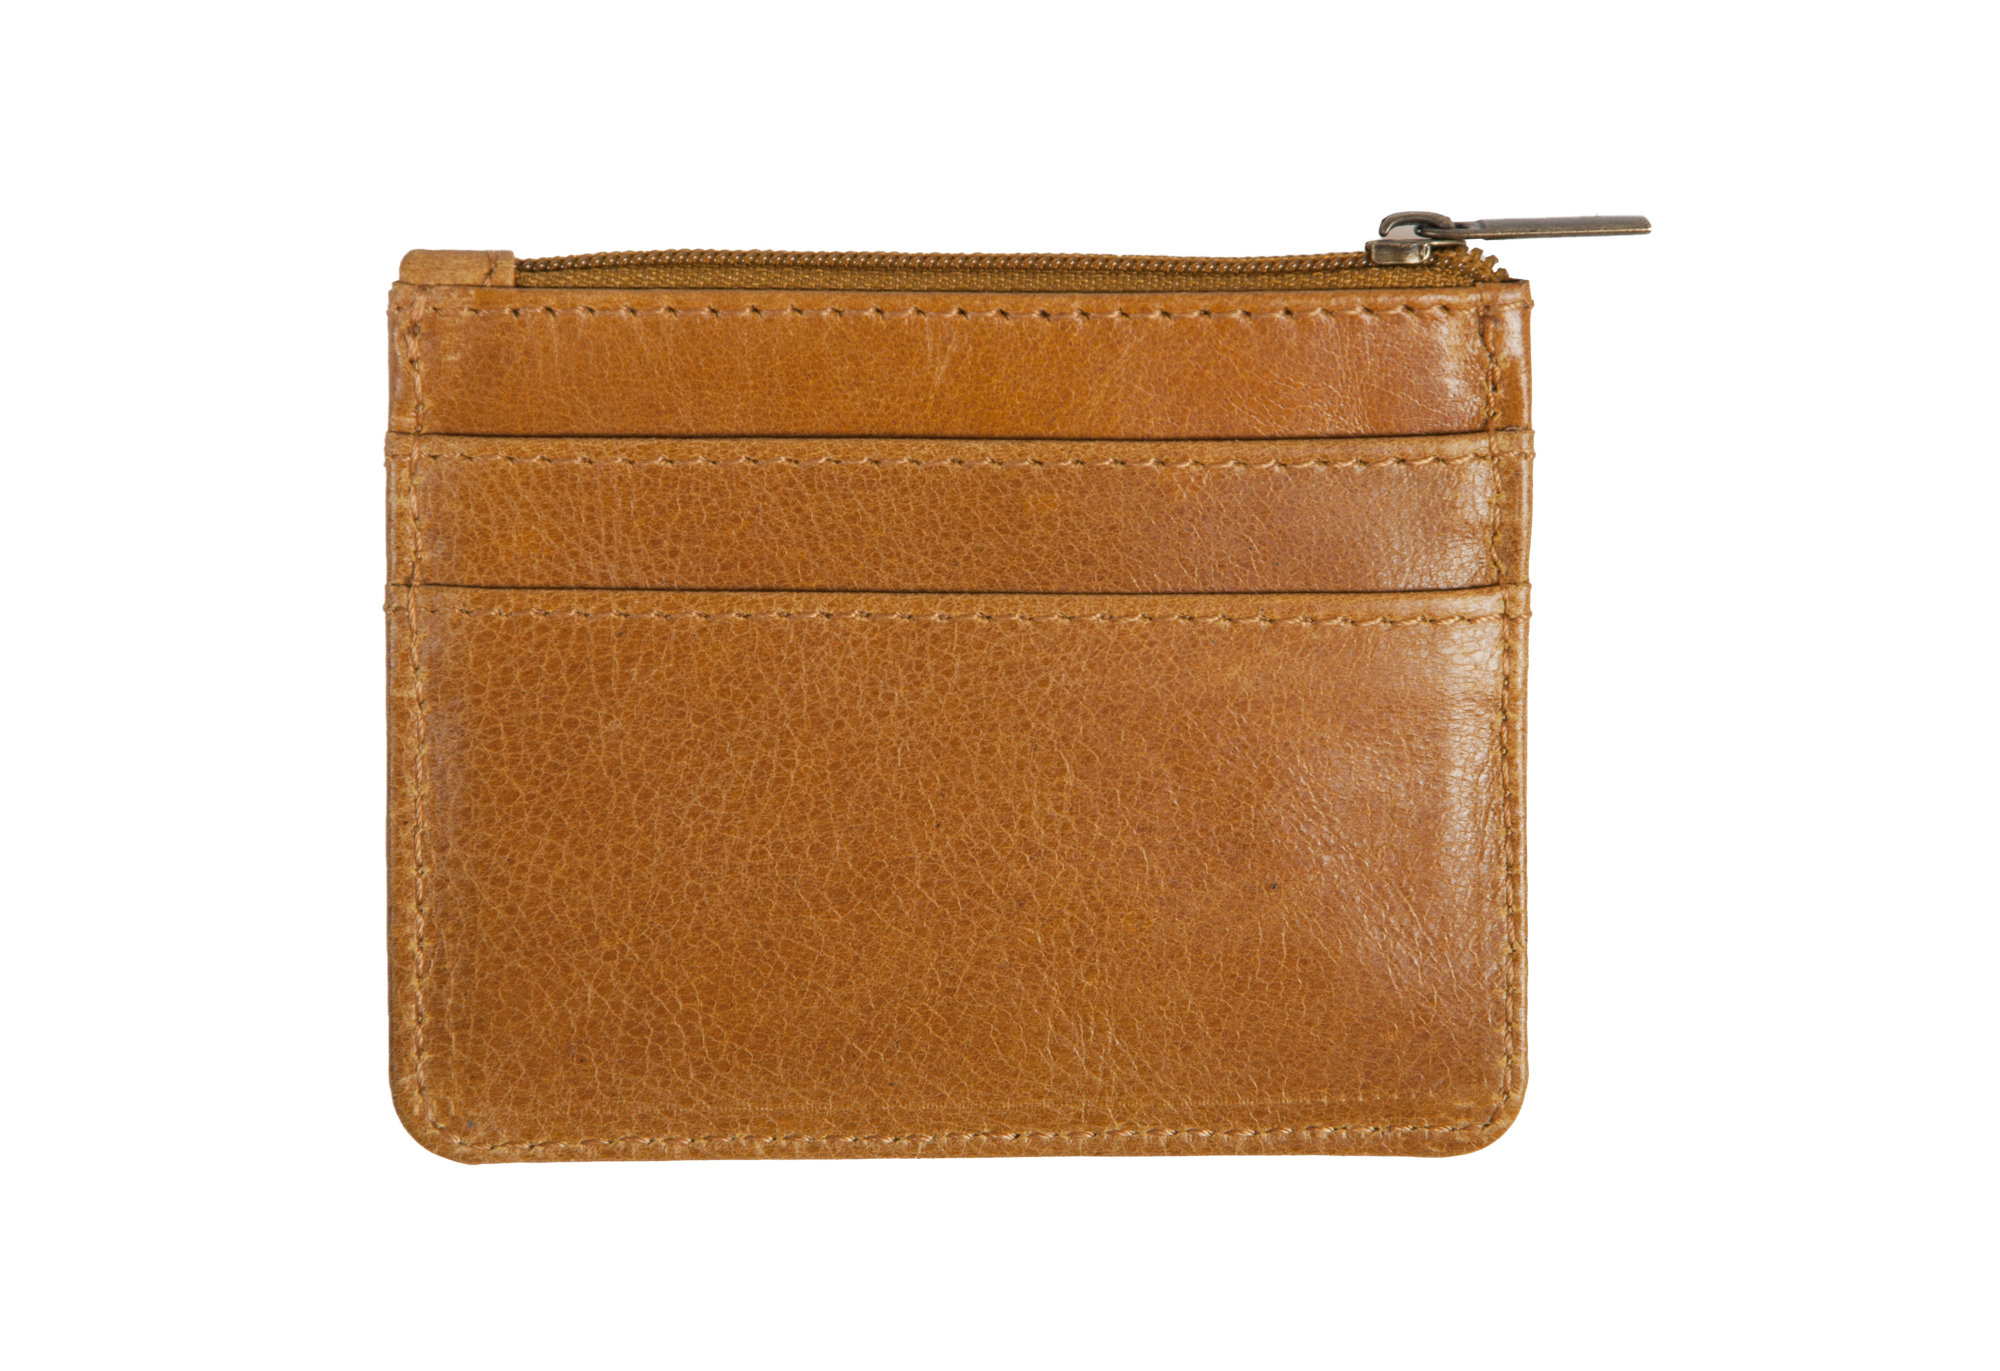 Handmade Leather Goods Online - Nic and Mel